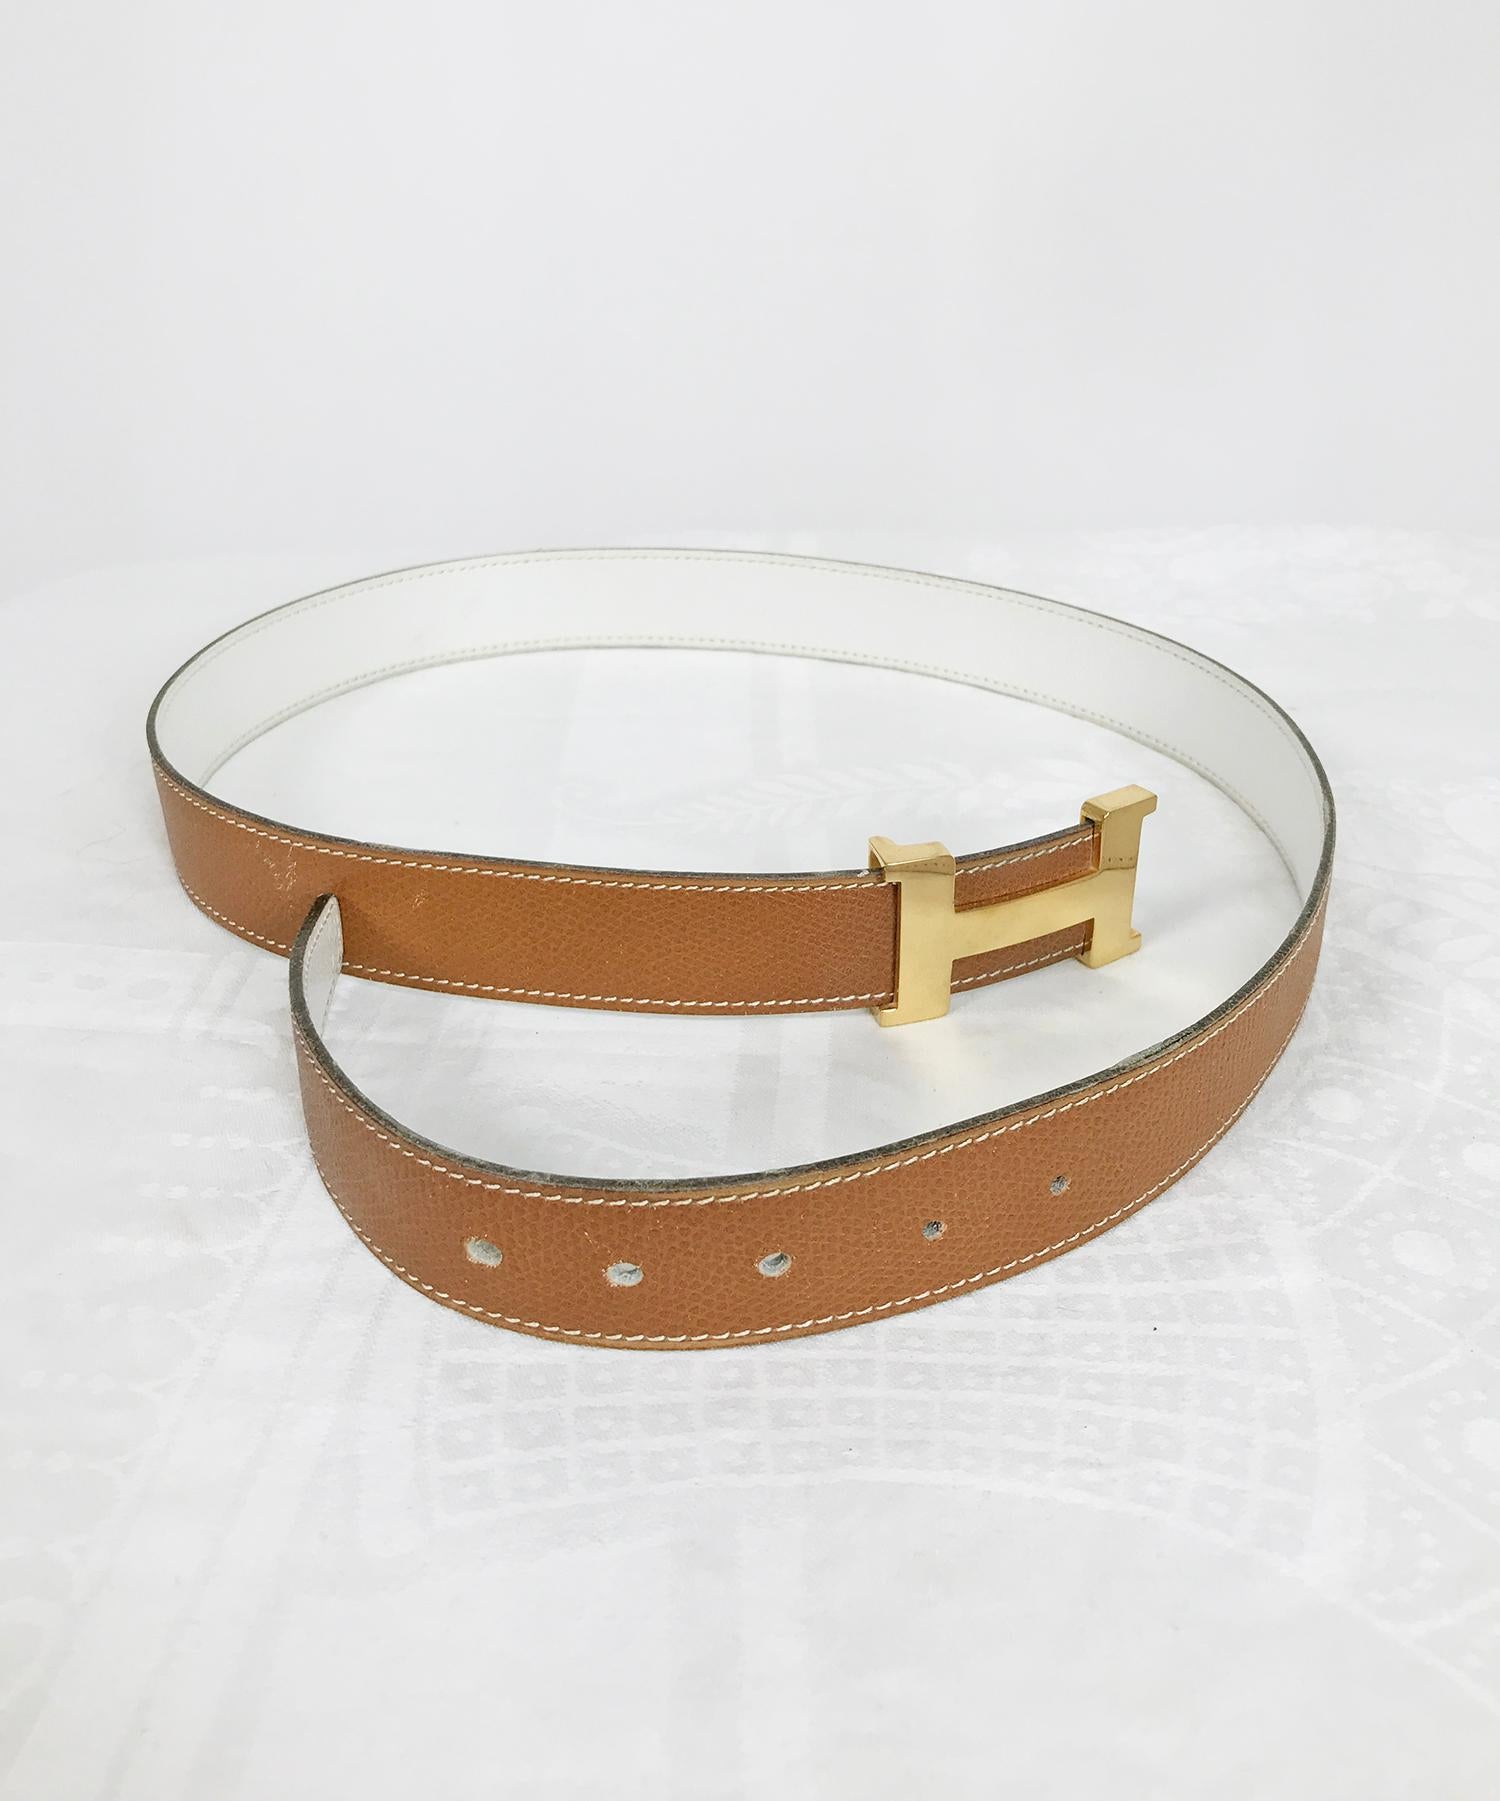 Hermes gold Constance H buckle and tan/cream belt, vintage from the 1970s in very good condition. Pre owned, the belt and buckle have been well cared for. Two extra holes have been added to the belt, a total of 3 original + 2. The gold plated buckle